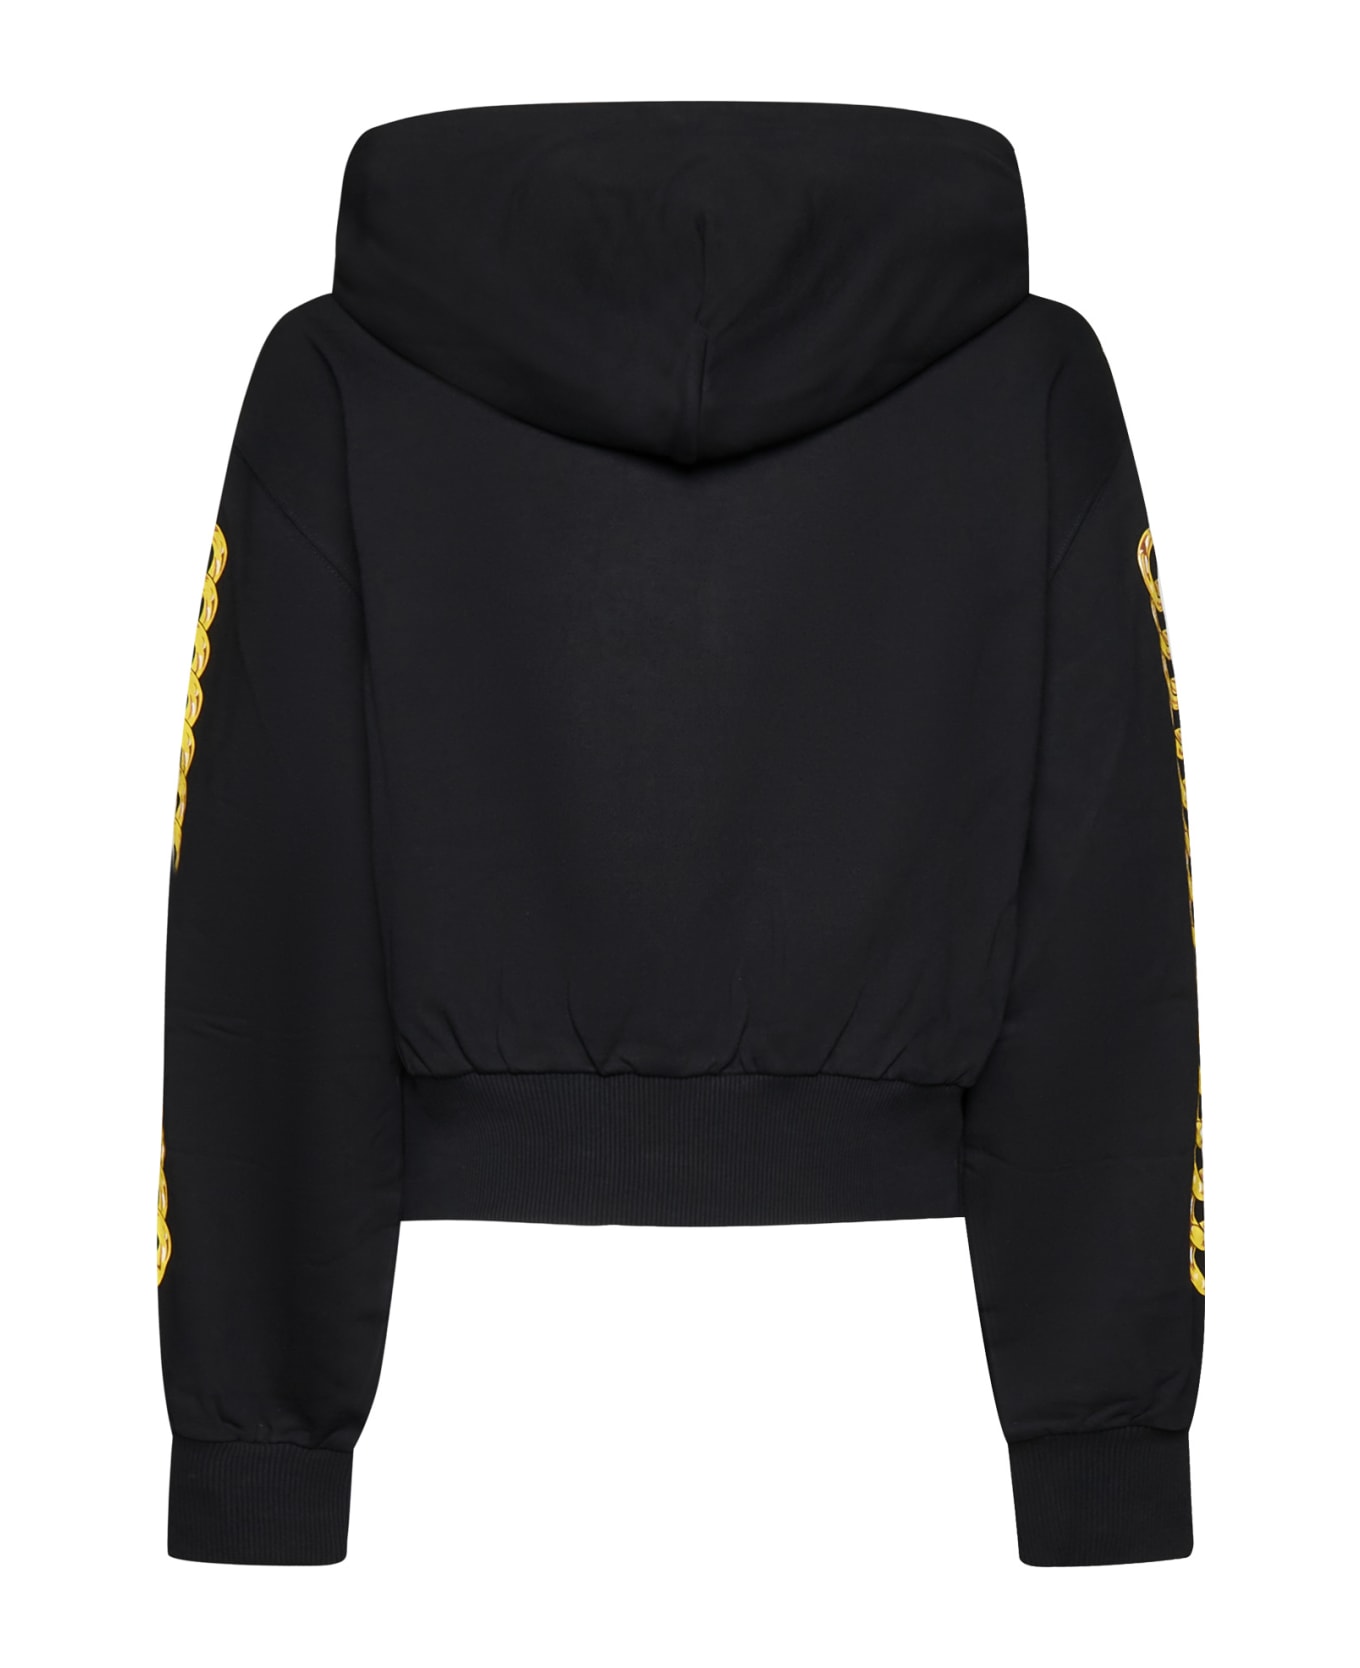 Versace Jeans Couture Chain Logo Hoodie - Black/gold